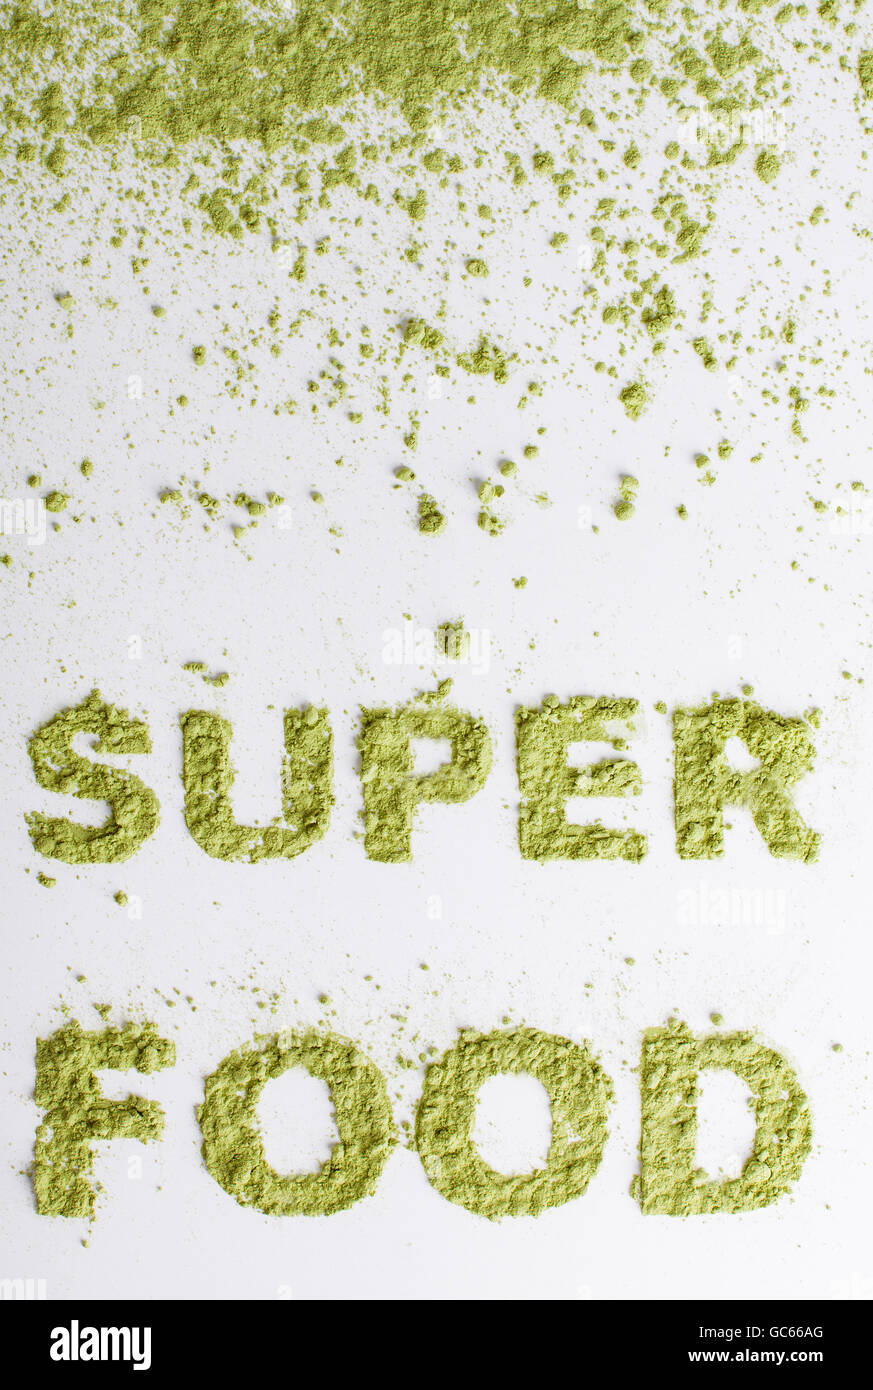 Word superfood piled of  green powder of barley grass on white background. Stock Photo